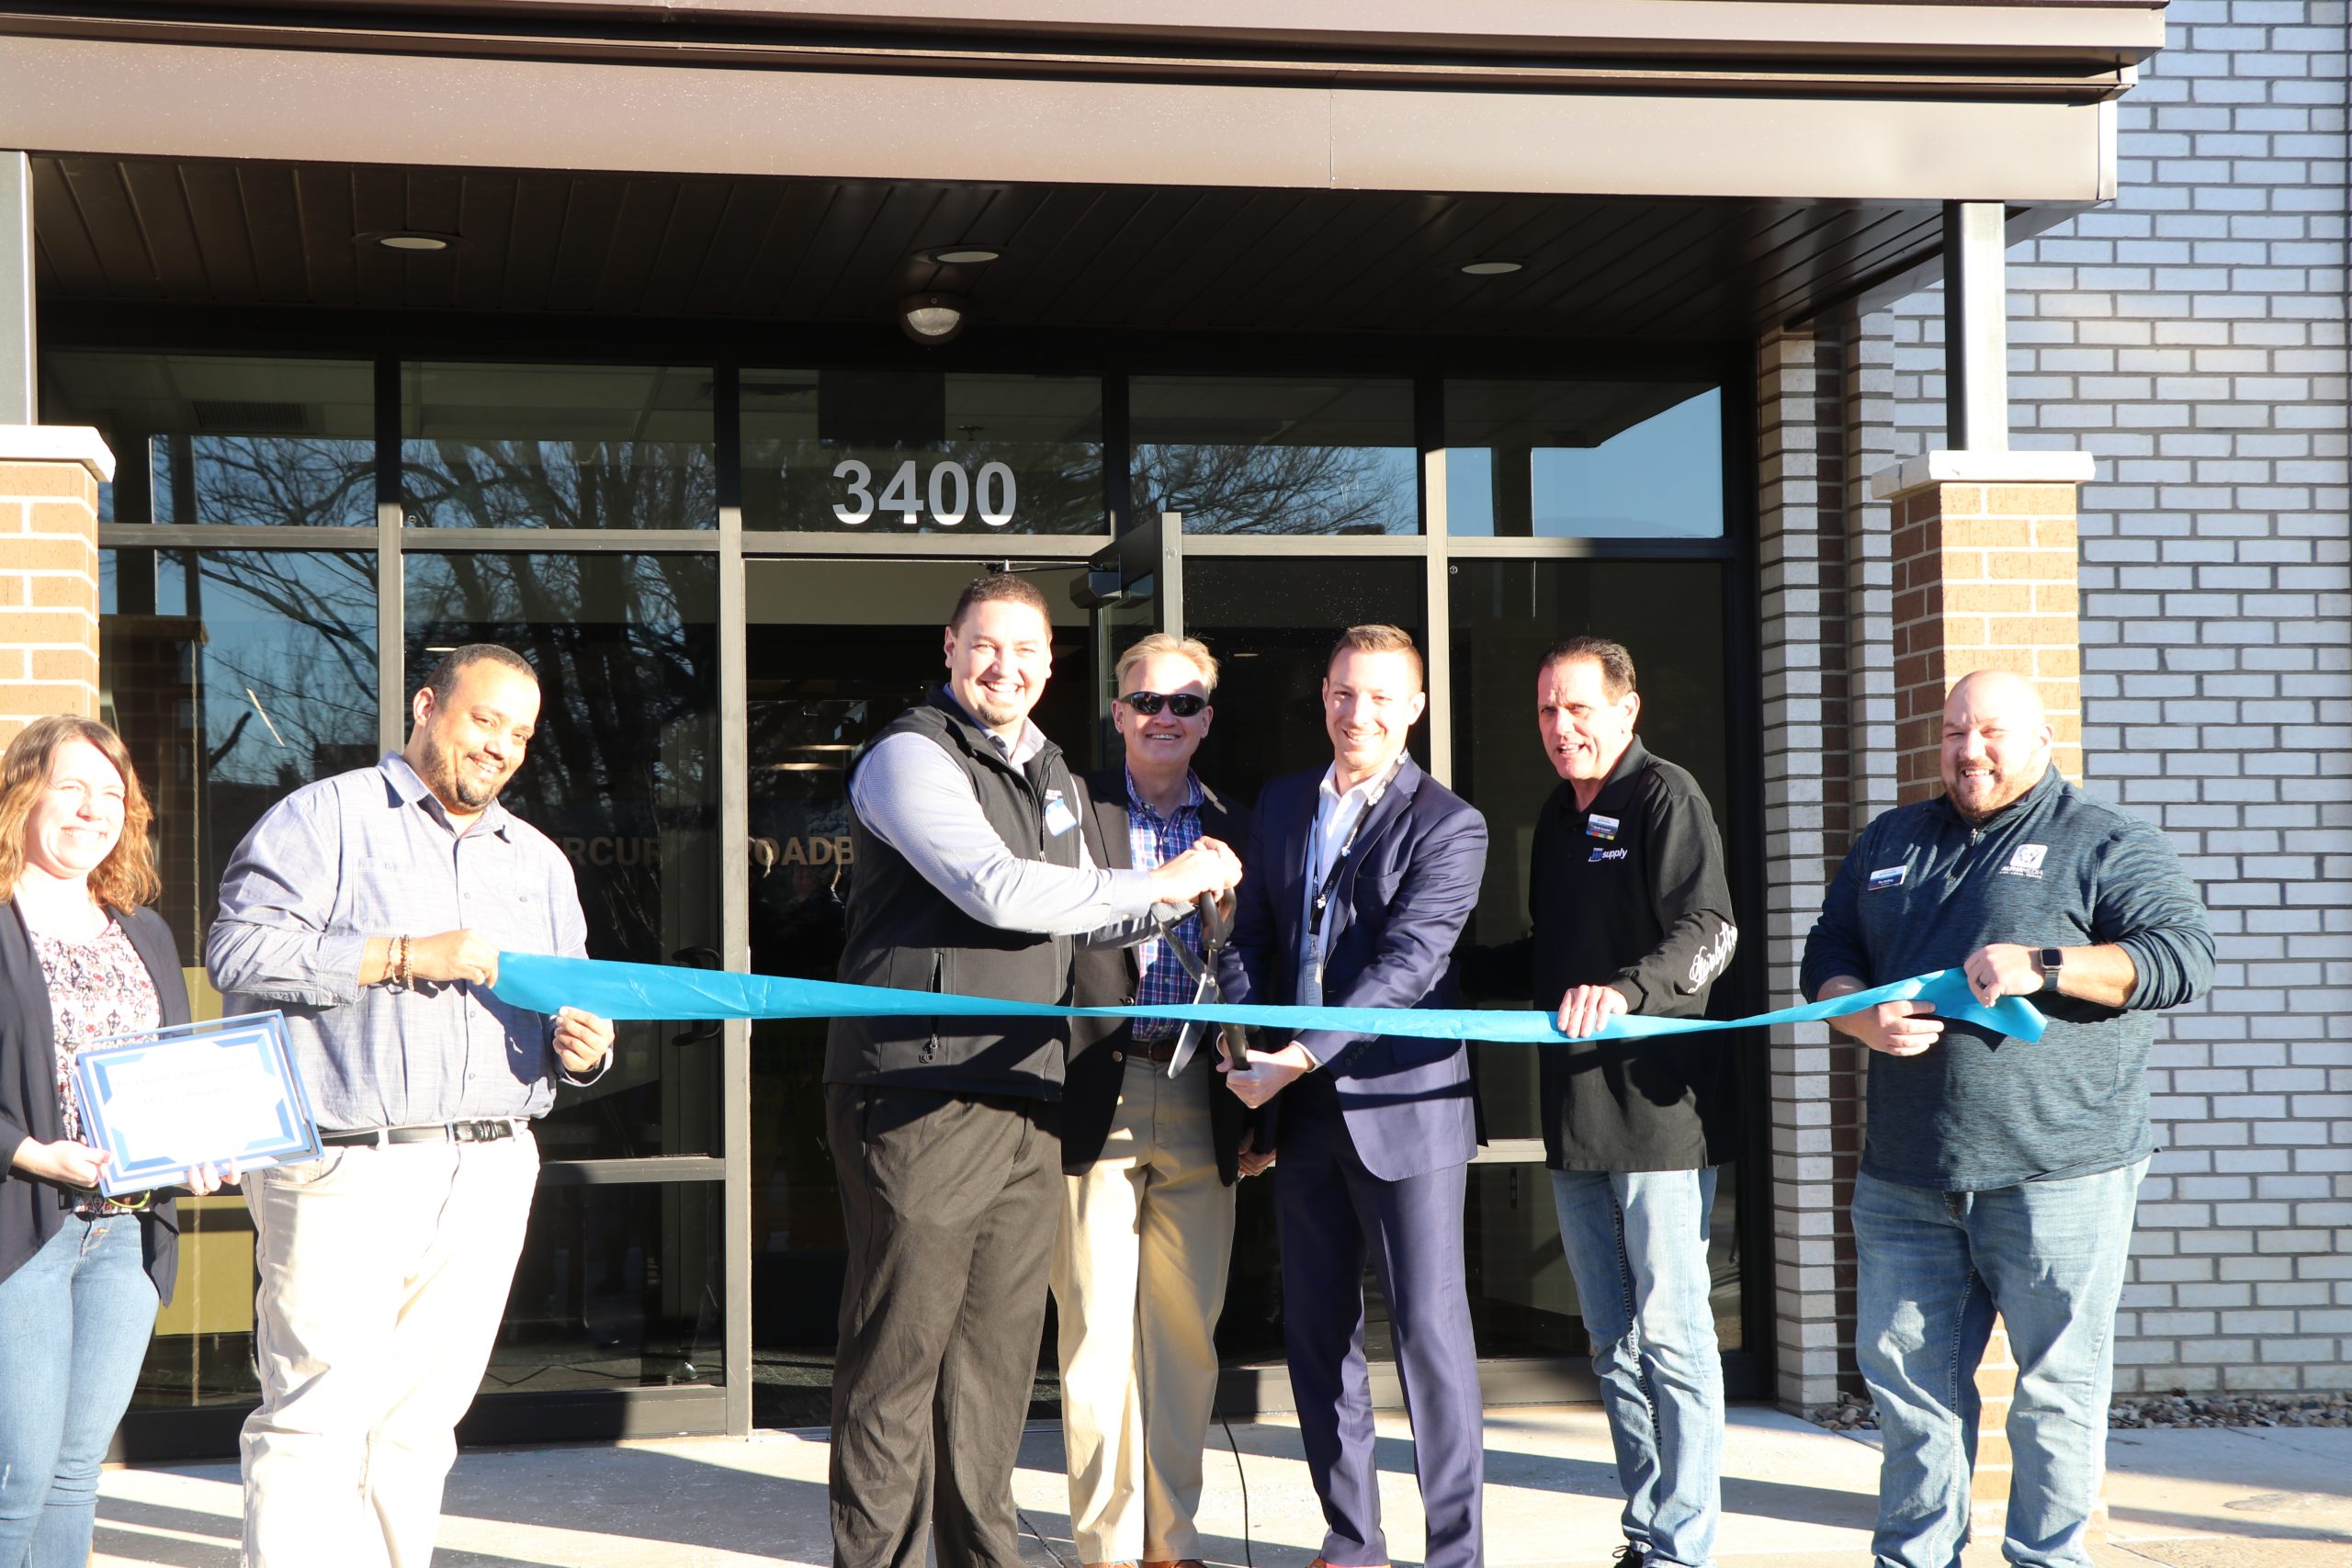 Mercury Broadband opened their new office to the Topeka Partnership members and hosted a ribbon-cutting on January 10, 2022.

3400 SW VAN BUREN ST.
TOPEKA, KS 66611